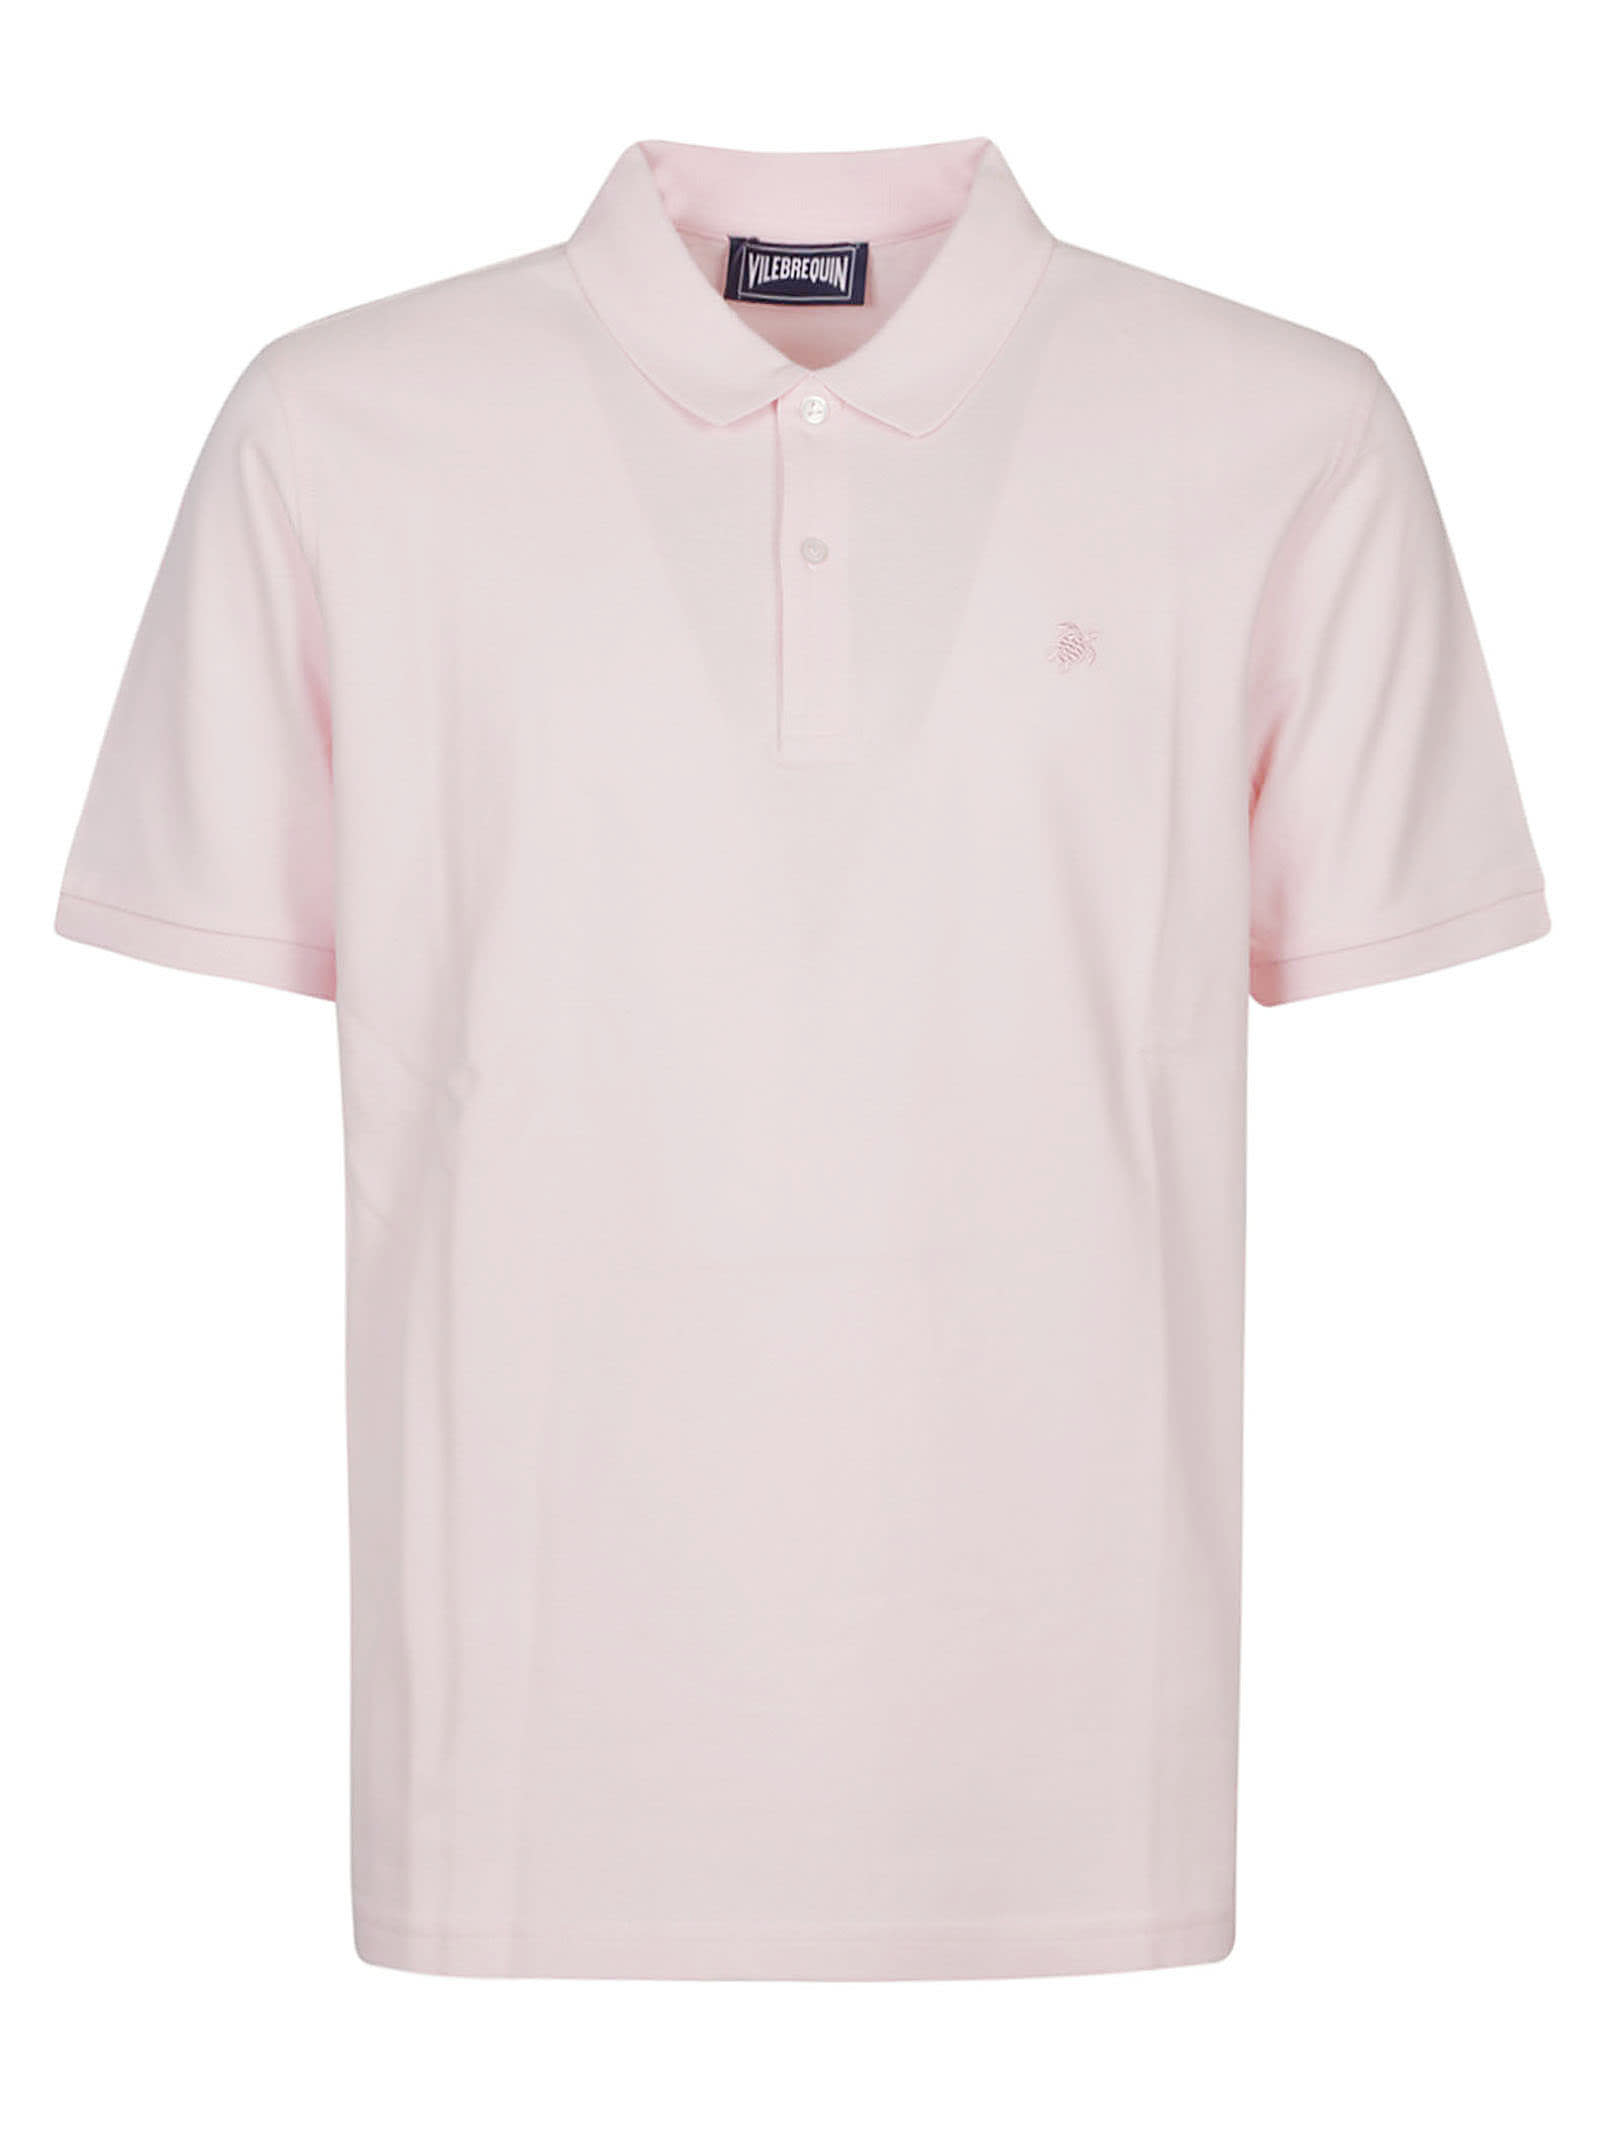 Vilebrequin Short Sleeve Washed Polo Shirt In Rosa Blushing Bride